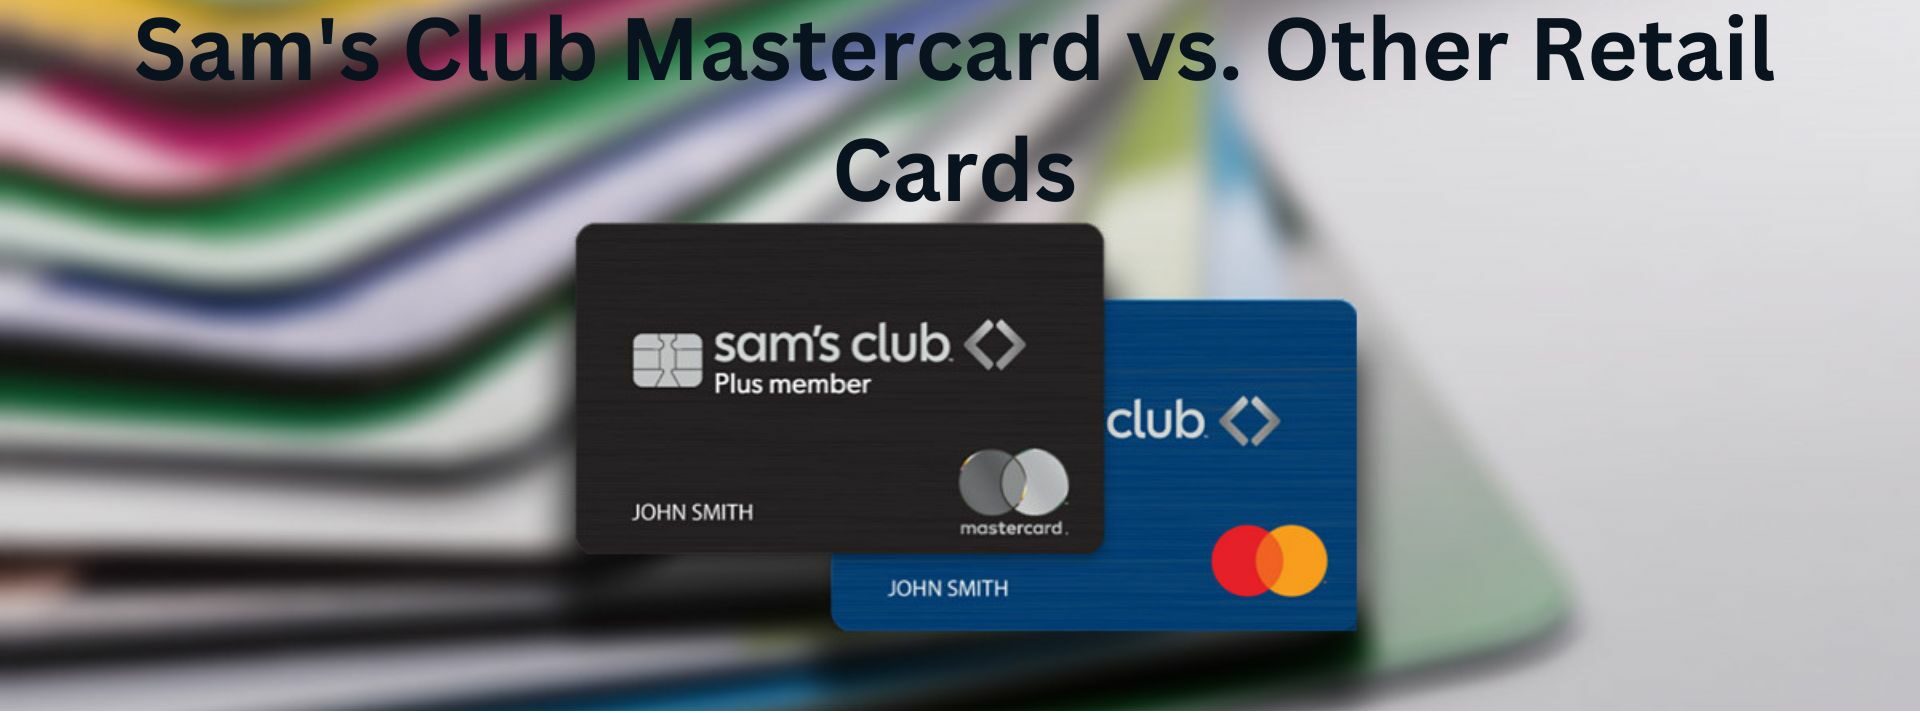 Sam's Club Mastercard vs. Other Retail Cards